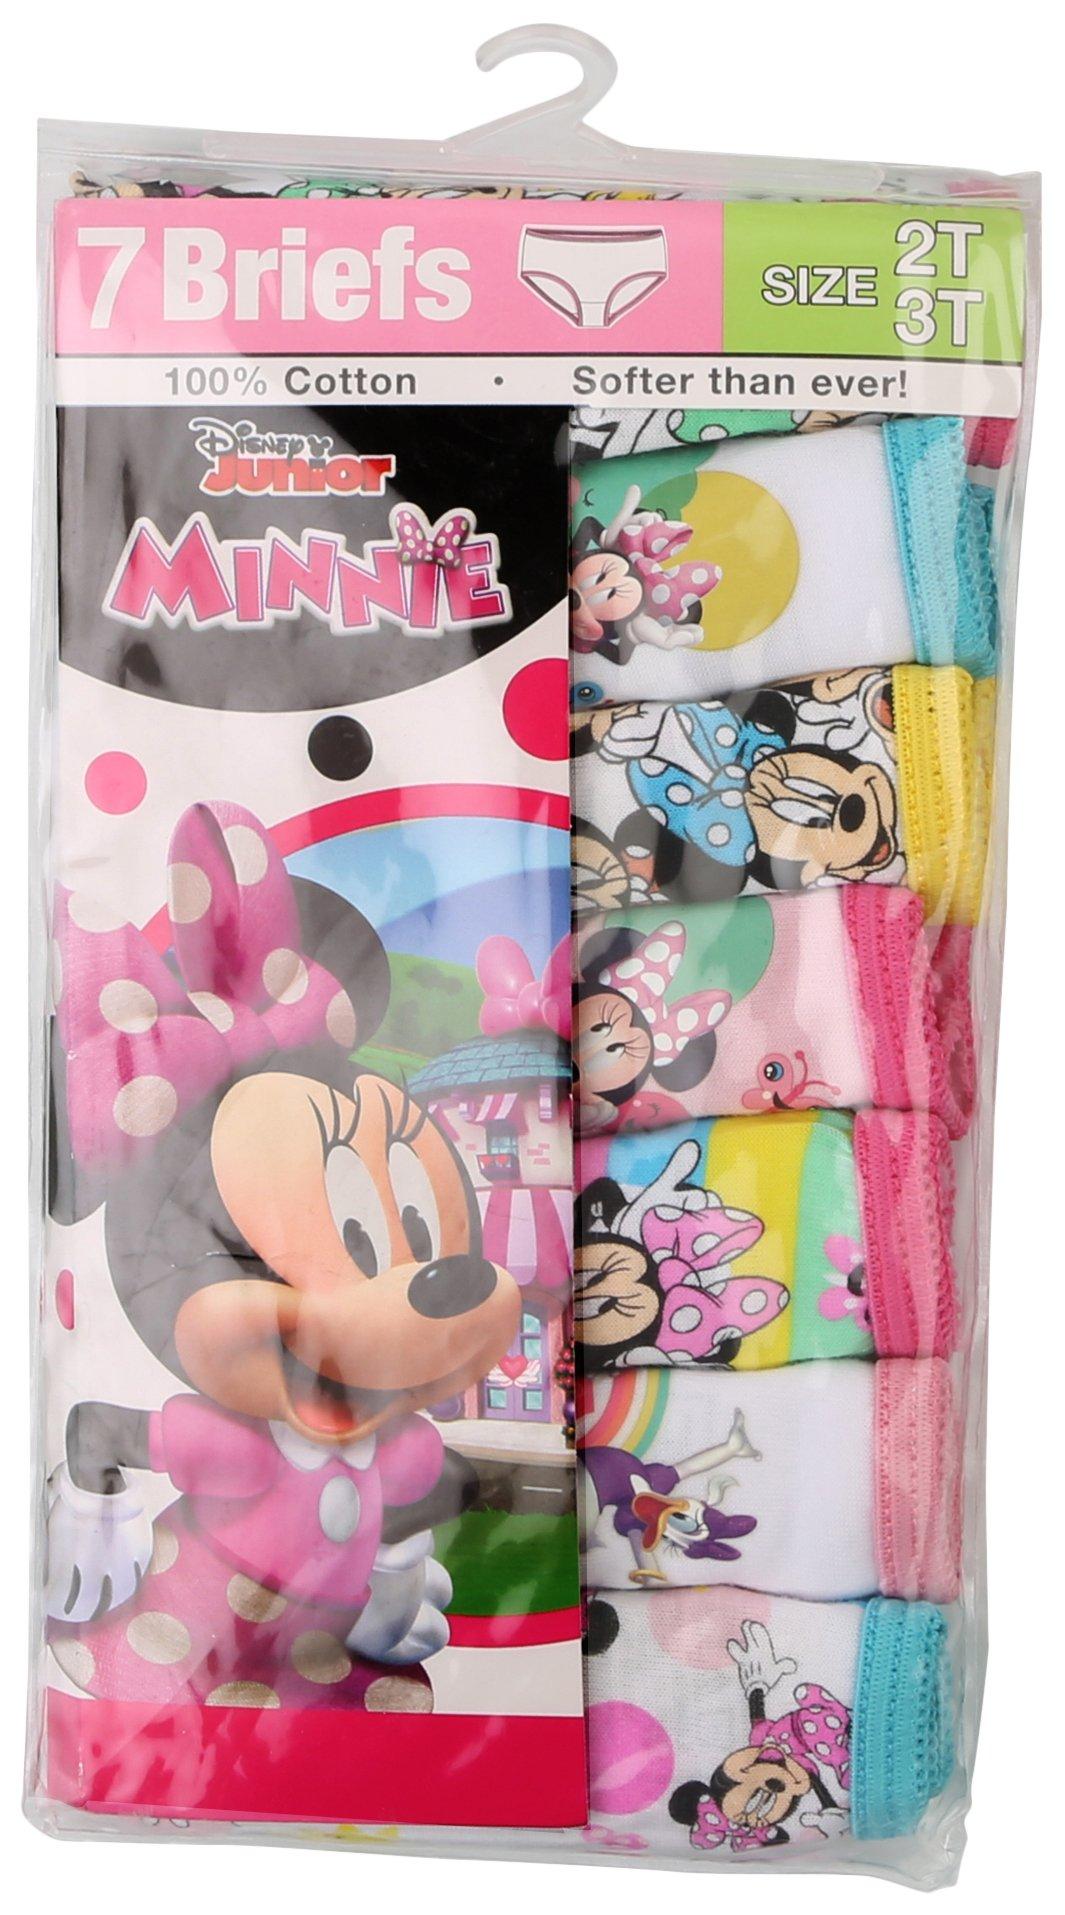 7-pack Cotton Briefs - Red/Minnie Mouse - Kids